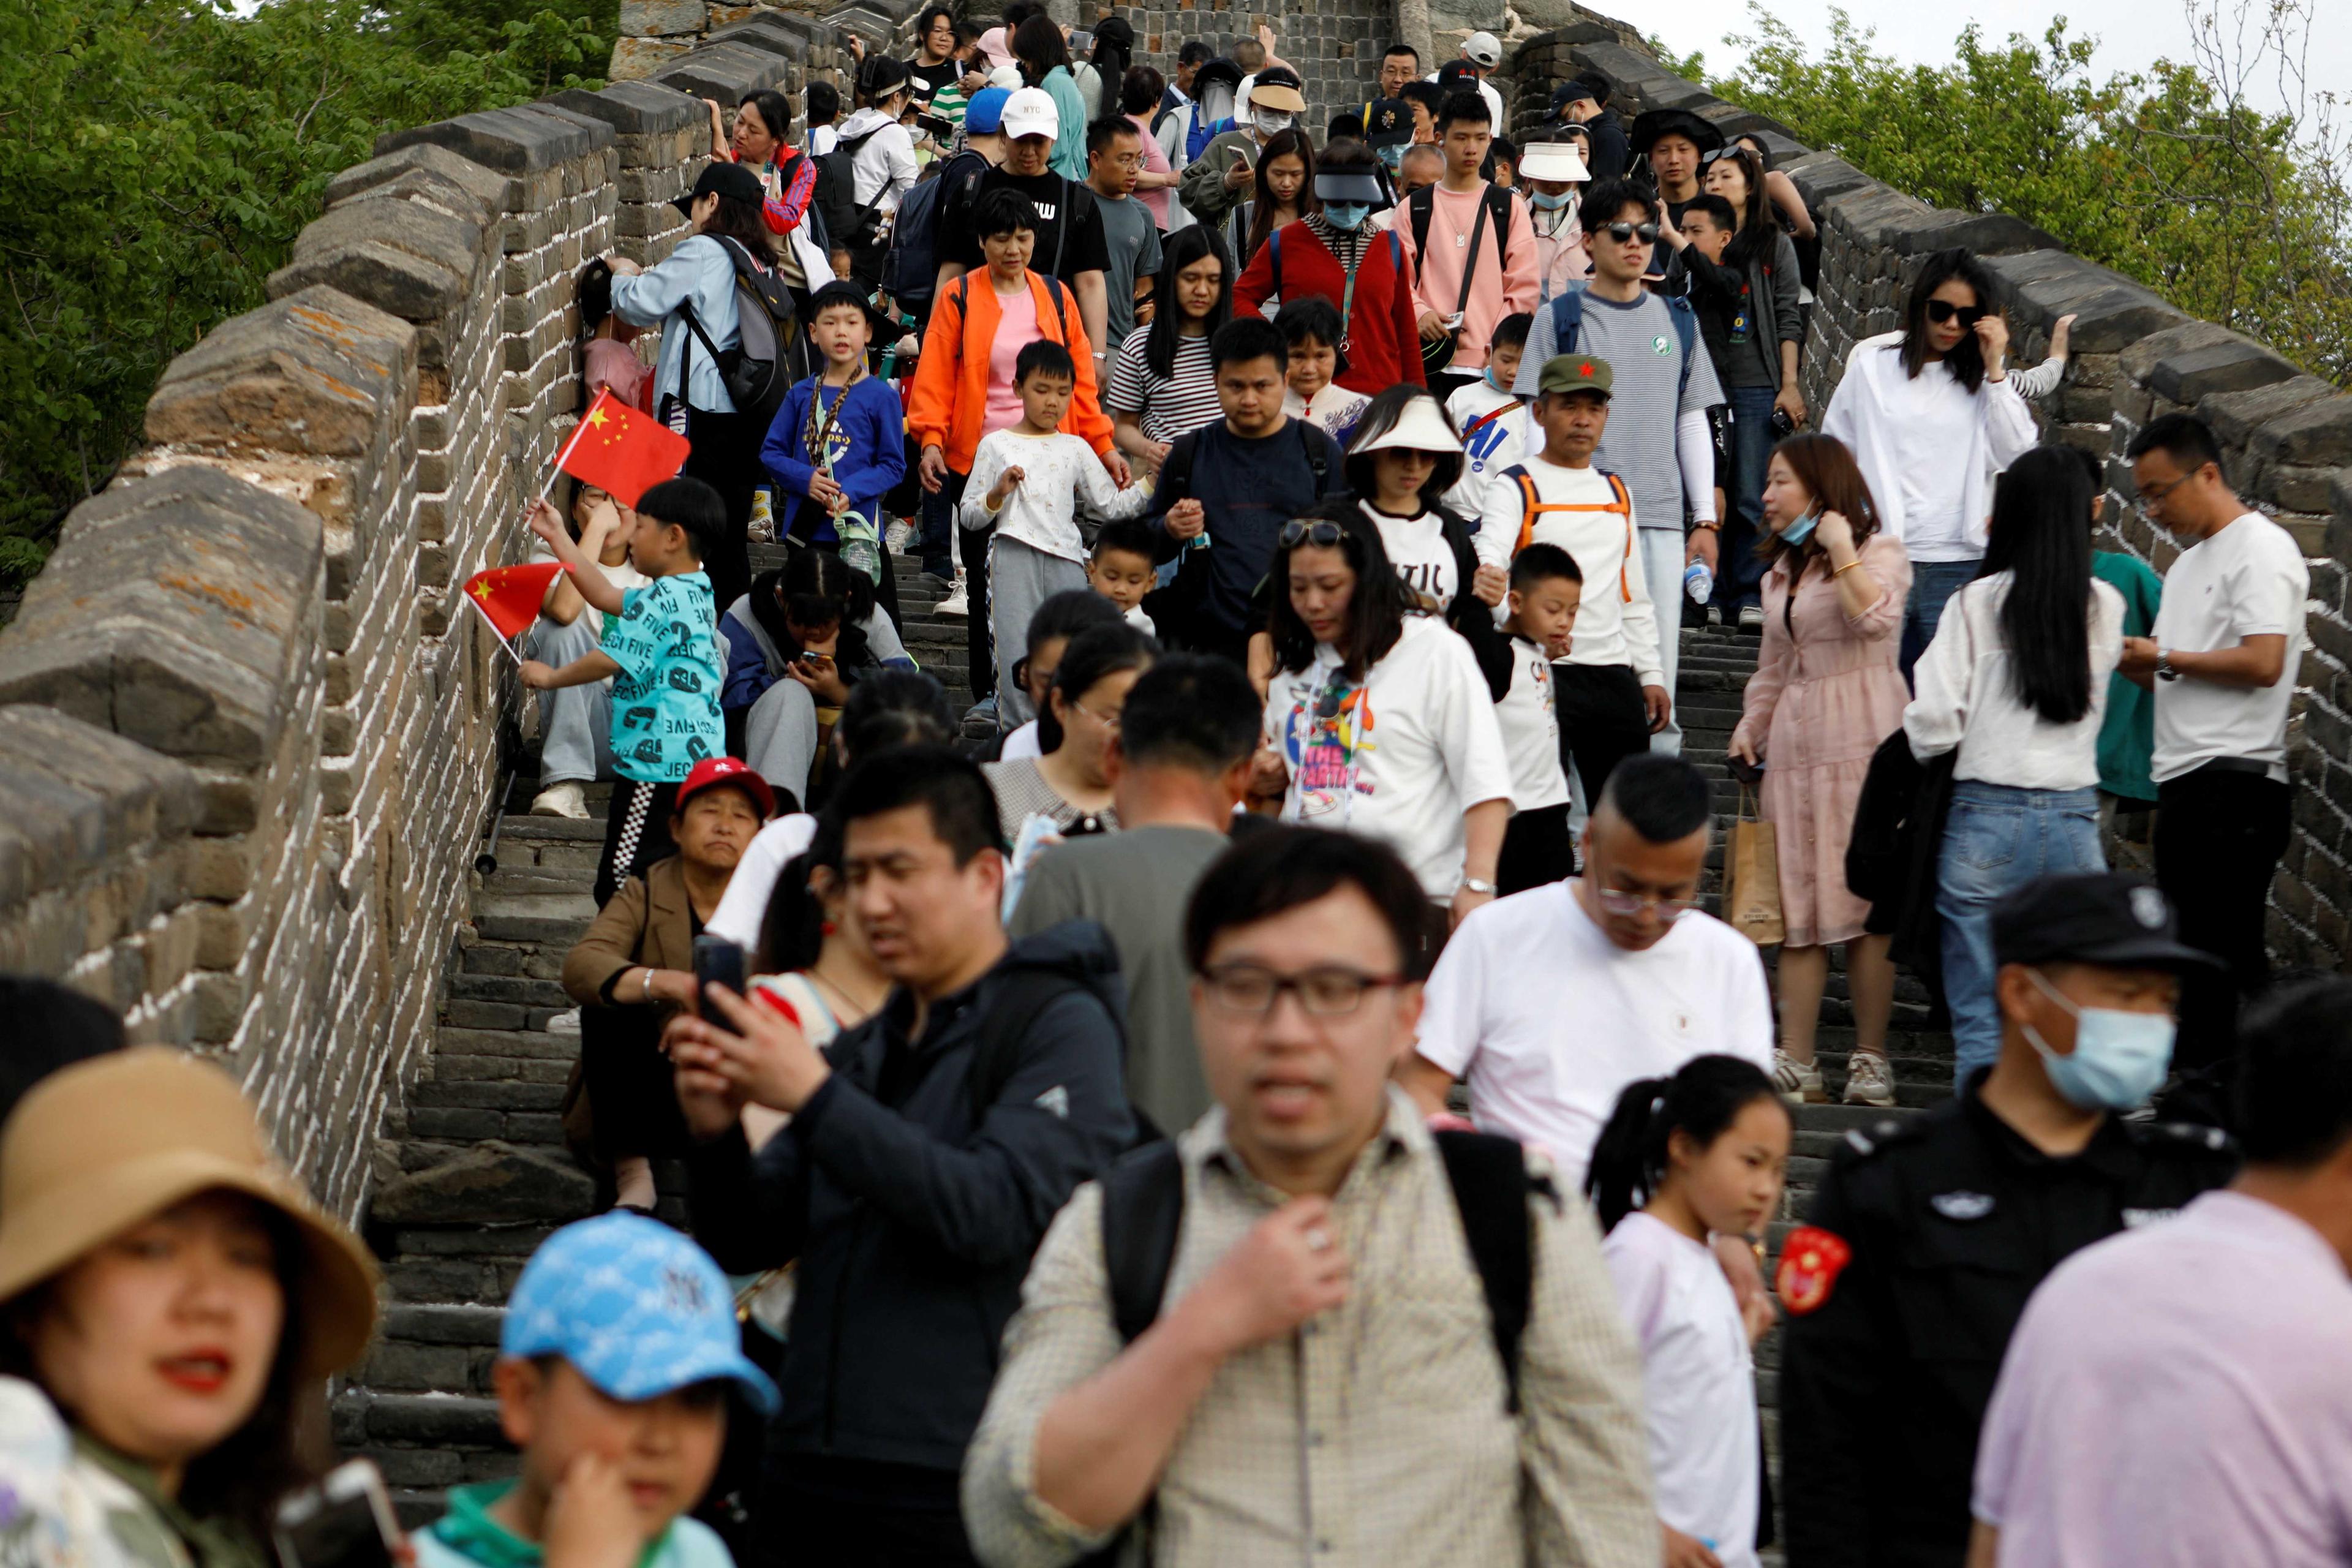 People visit the Mutianyu section of the Great Wall, during the five-day Labour Day holiday in Beijing, China April 30. Photo: Reuters